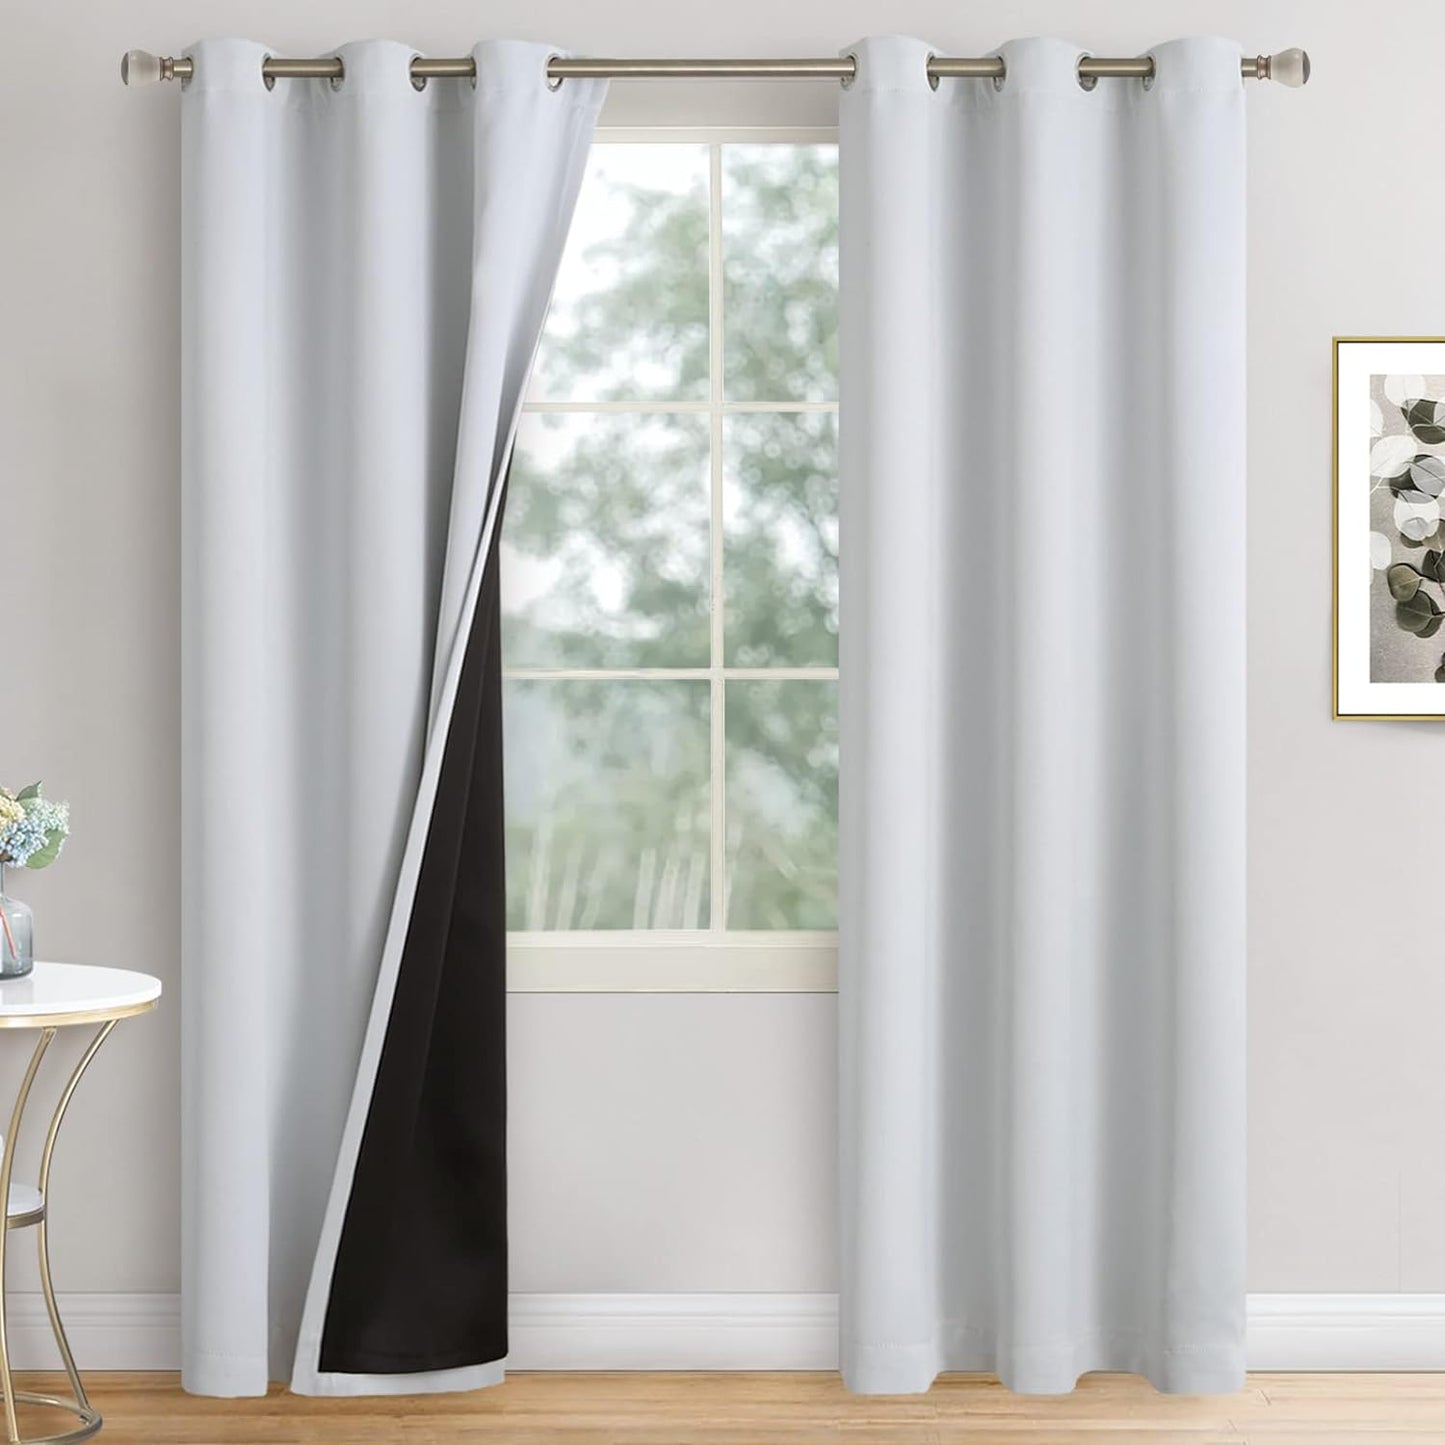 QUEMAS Short Blackout Curtains 54 Inch Length 2 Panels, 100% Light Blocking Thermal Insulated Soundproof Grommet Small Window Curtains for Bedroom Basement with Black Liner, Each 42 Inch Wide, White  QUEMAS Greyish White + Black Lining W42 X L84 